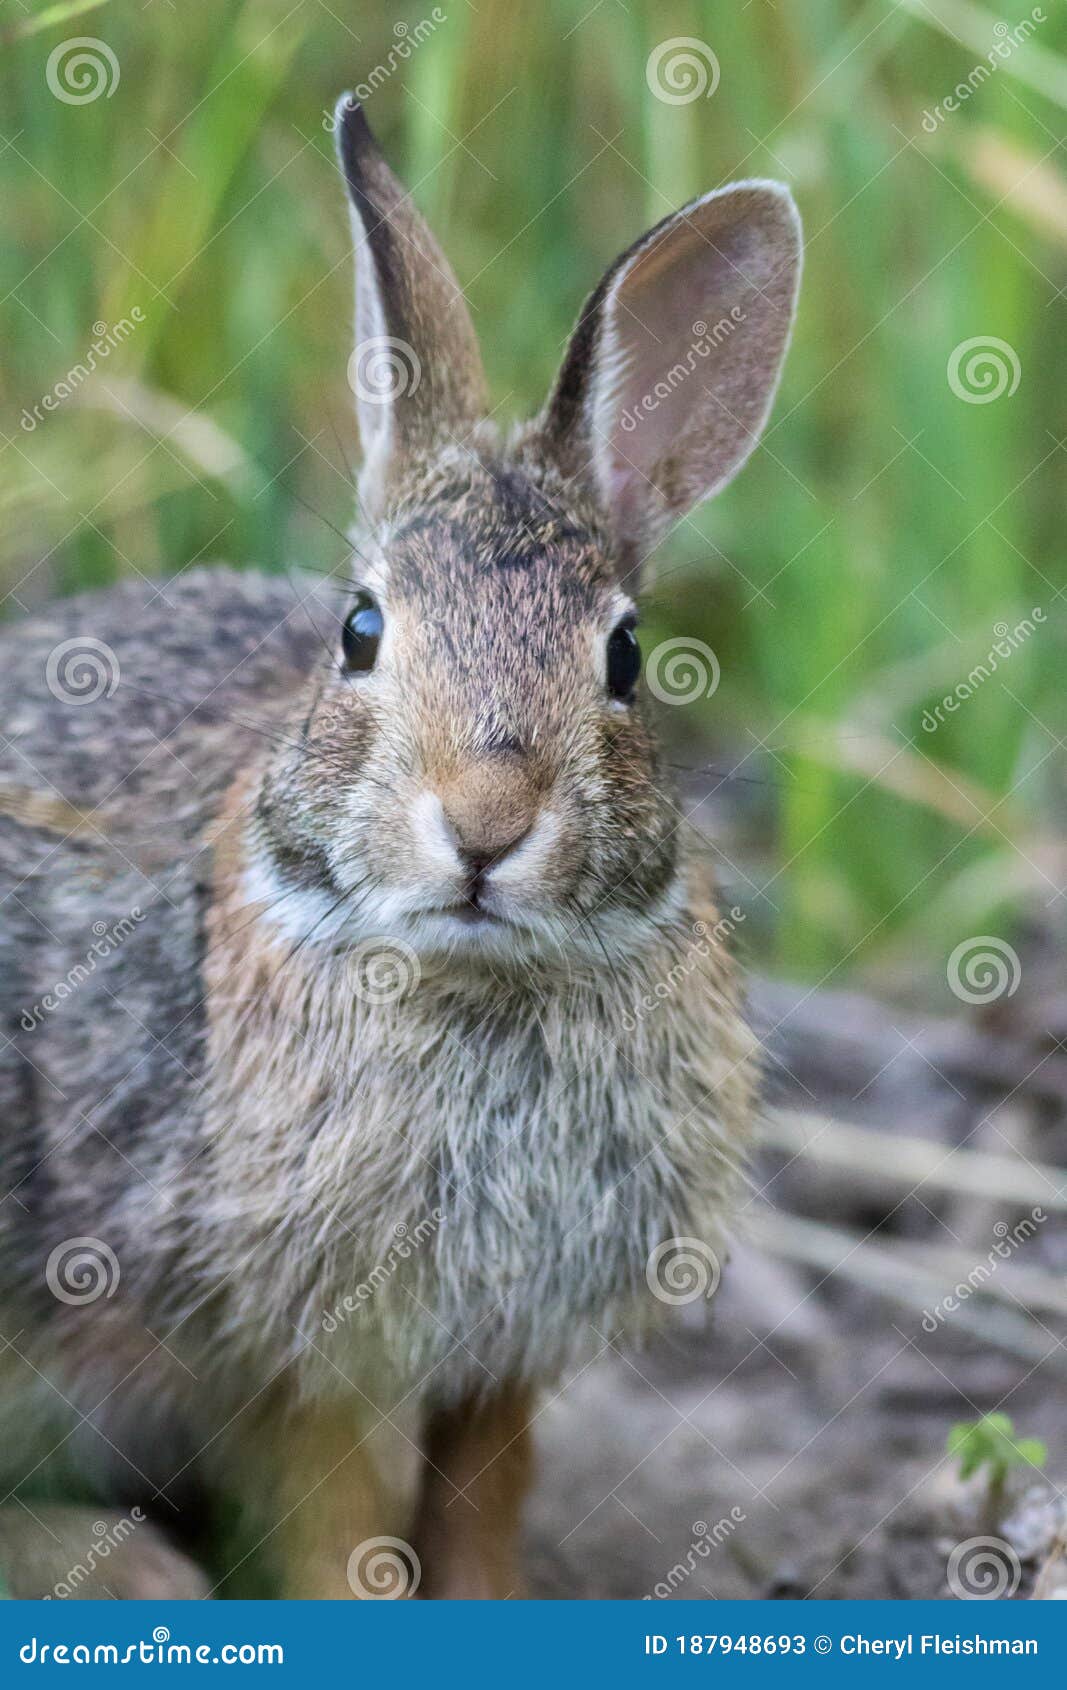 eastern cottontail rabbit closeup in soft morning light